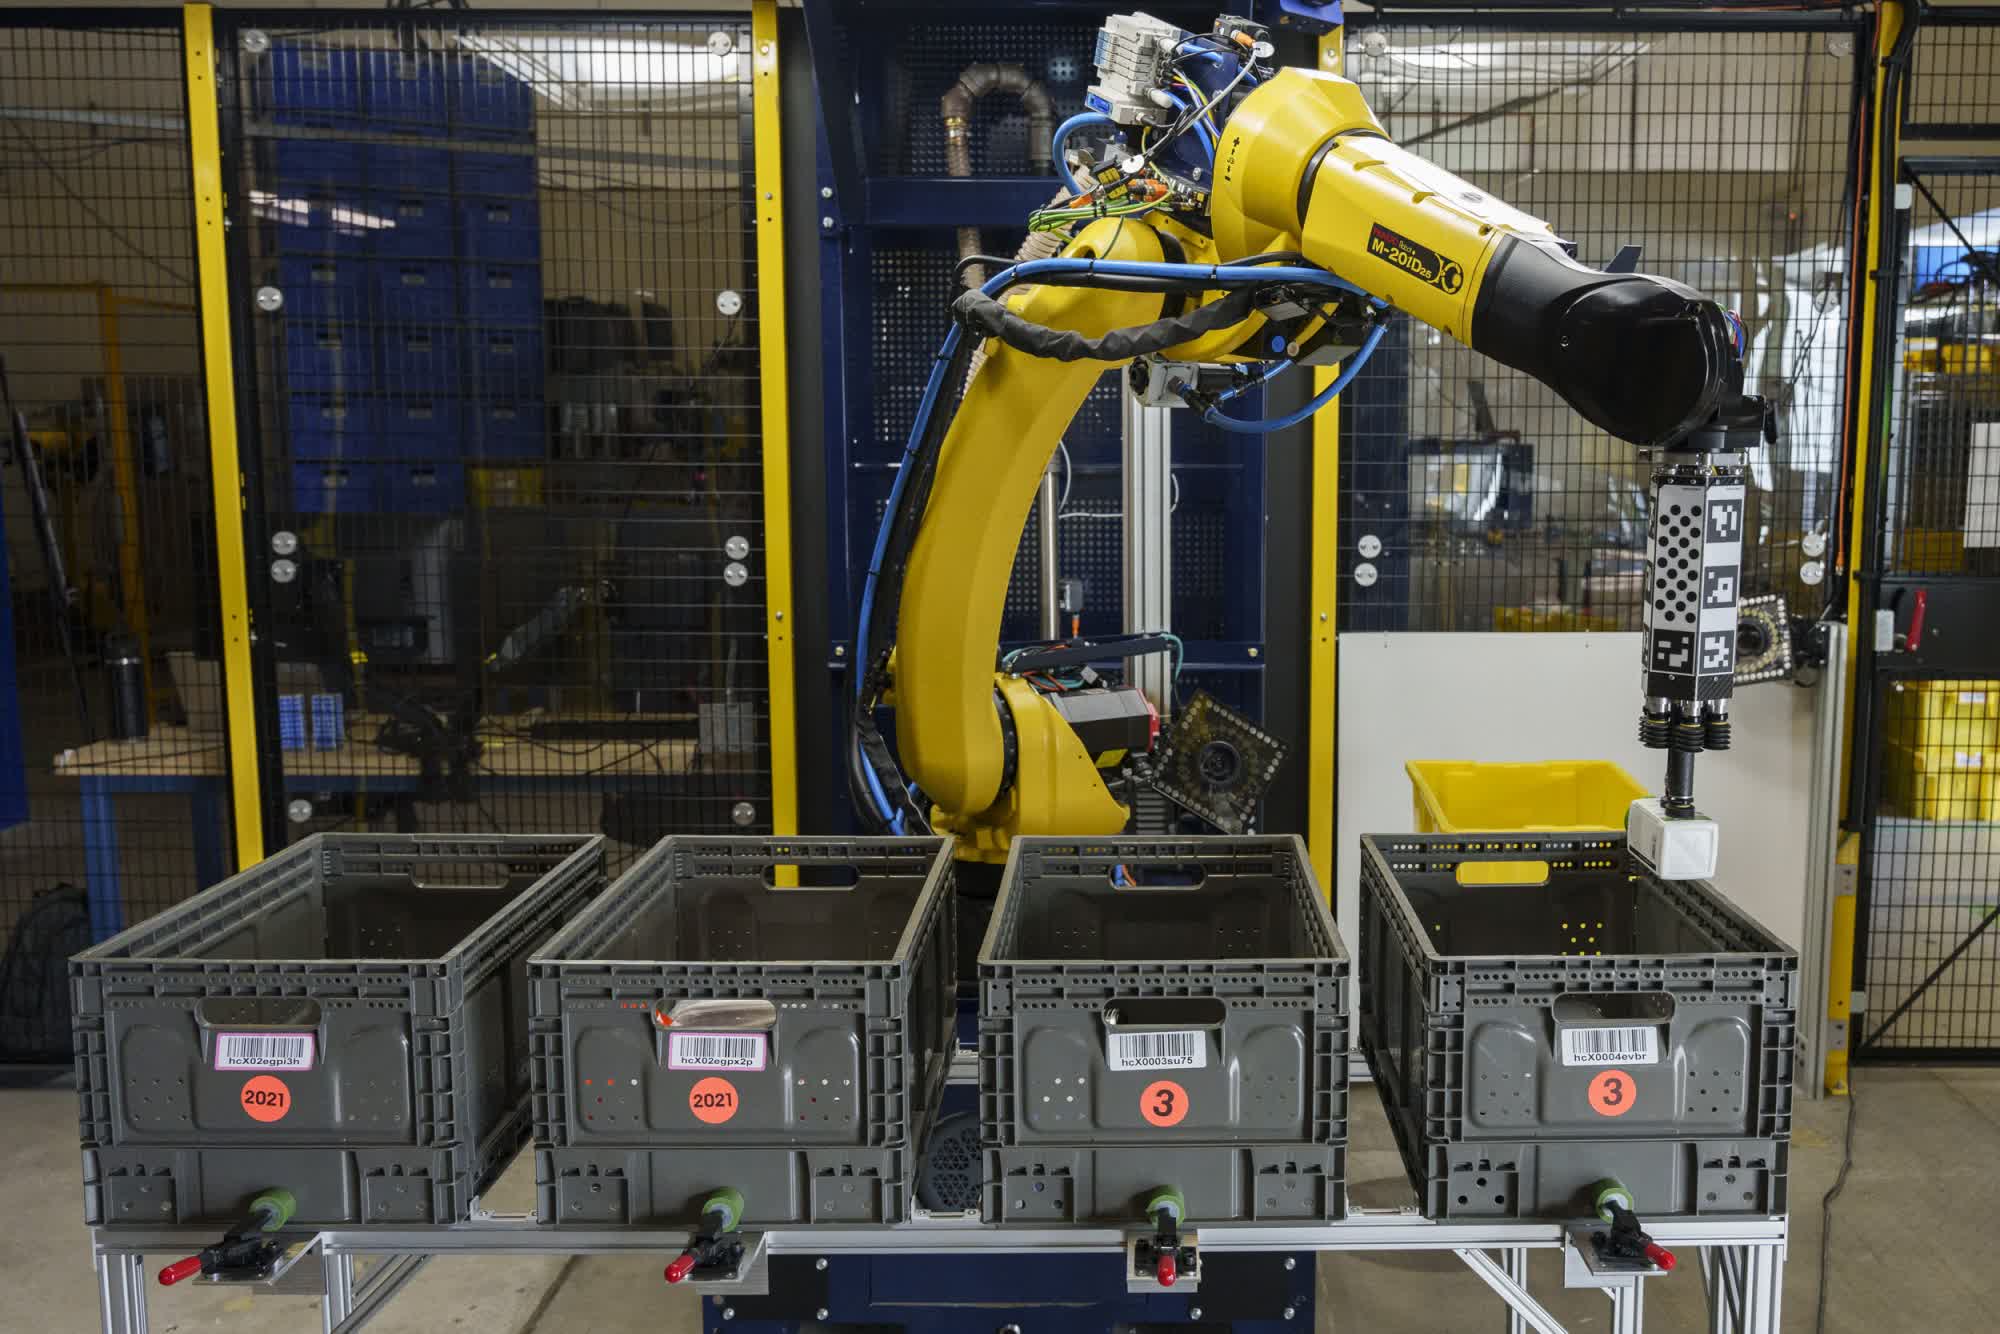 AI-powered Amazon warehouse robot performs the “repetitive tasks” carried out by human workers